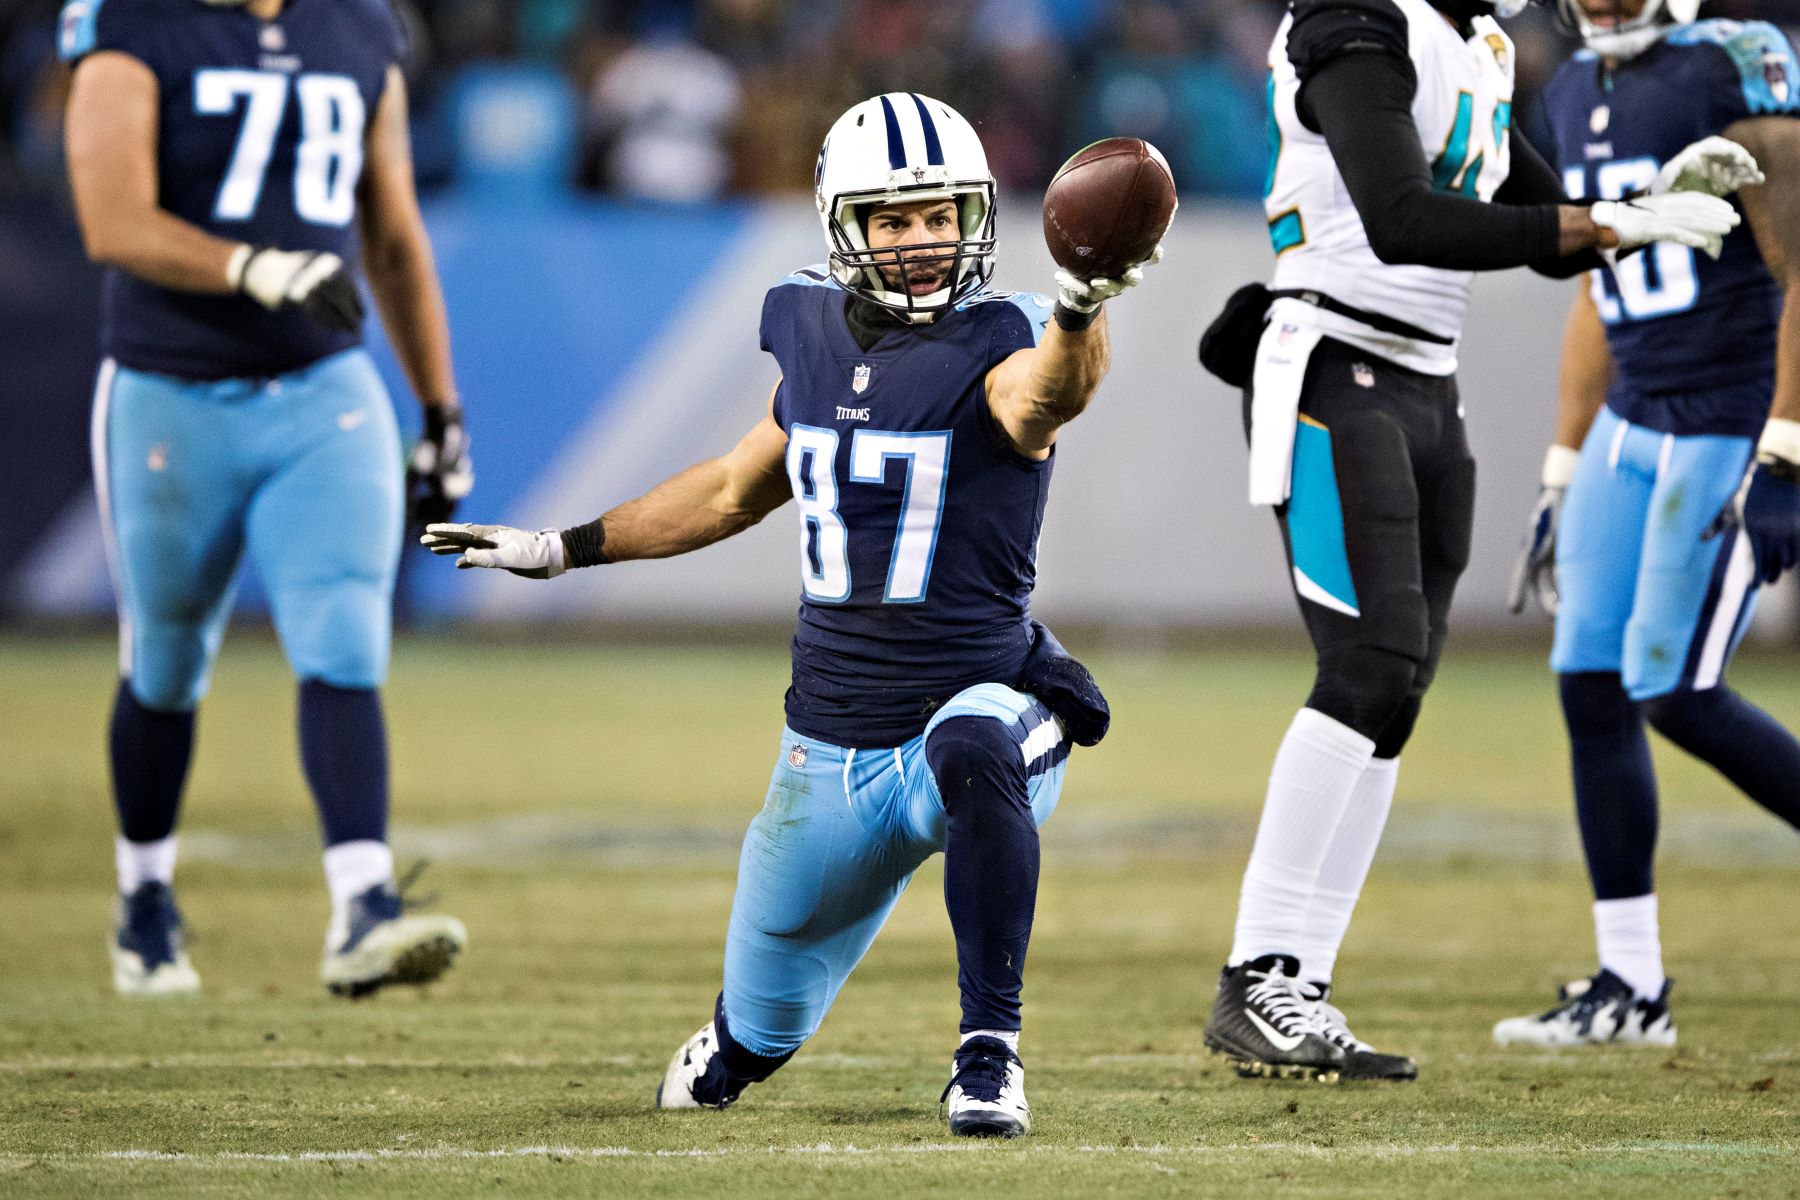 Eric Decker #87 of the Tennessee Titans during a game against the Jacksonville Jaguars at Nissan Stadium